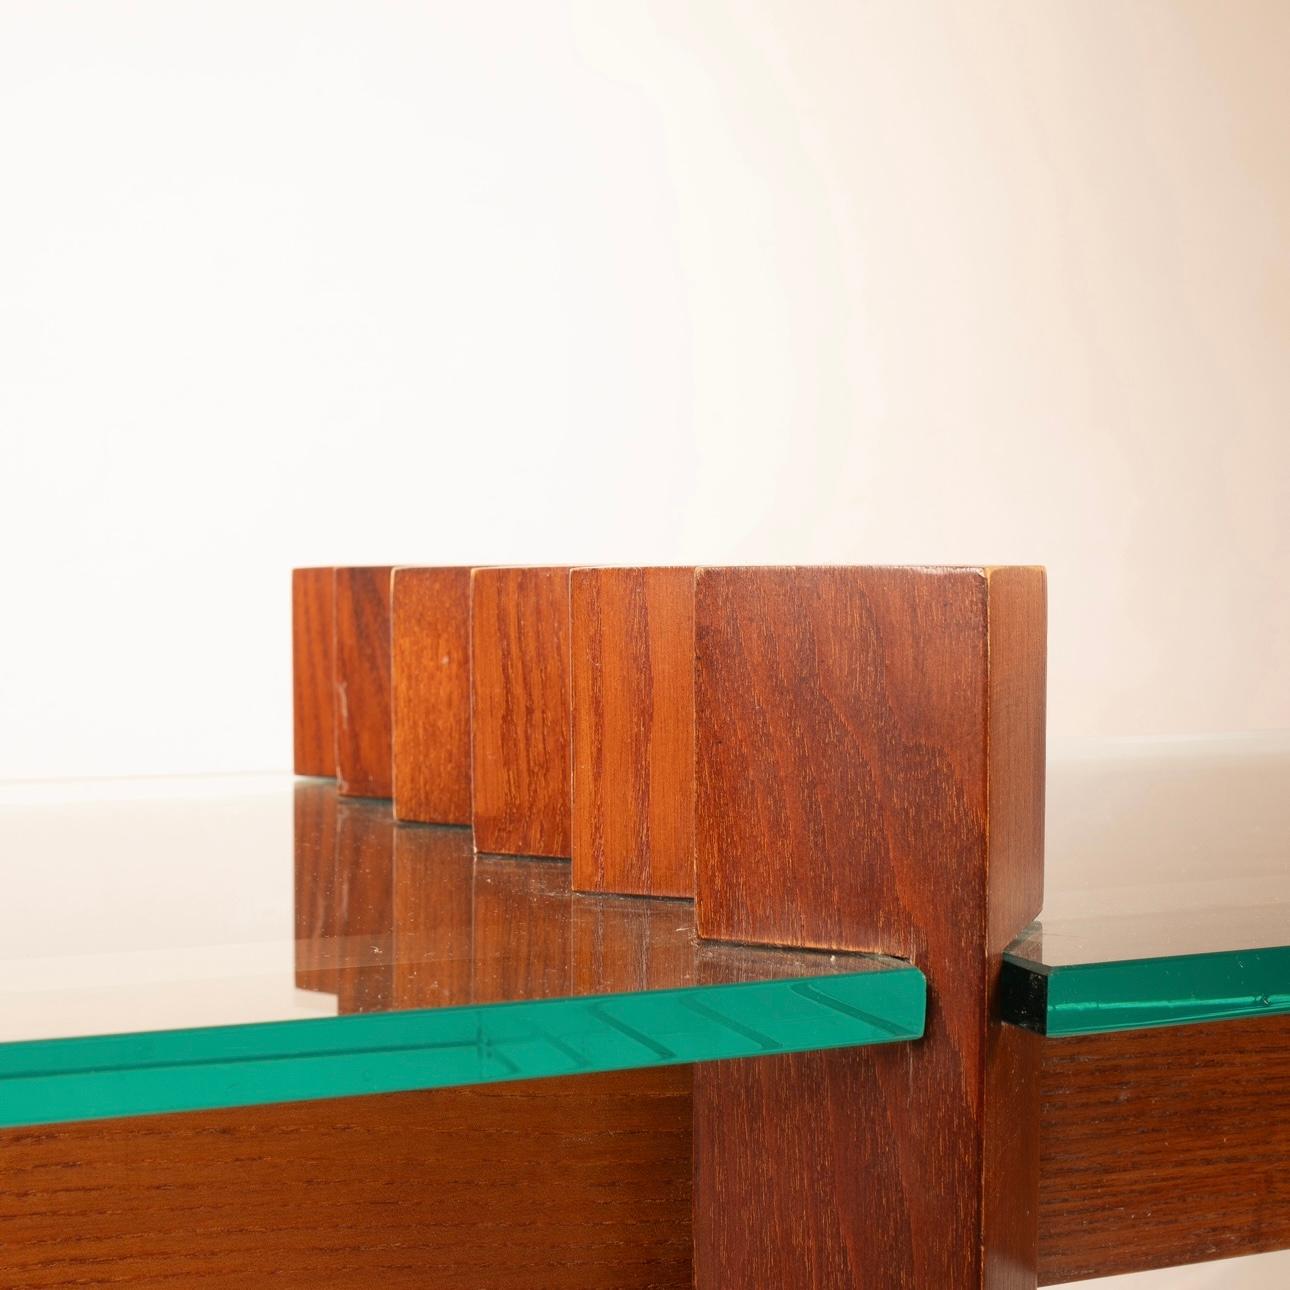 Mid-20th Century Solid Wood and Crystal Console Table from the 1960s att. Carlo Scarpa 1960's For Sale